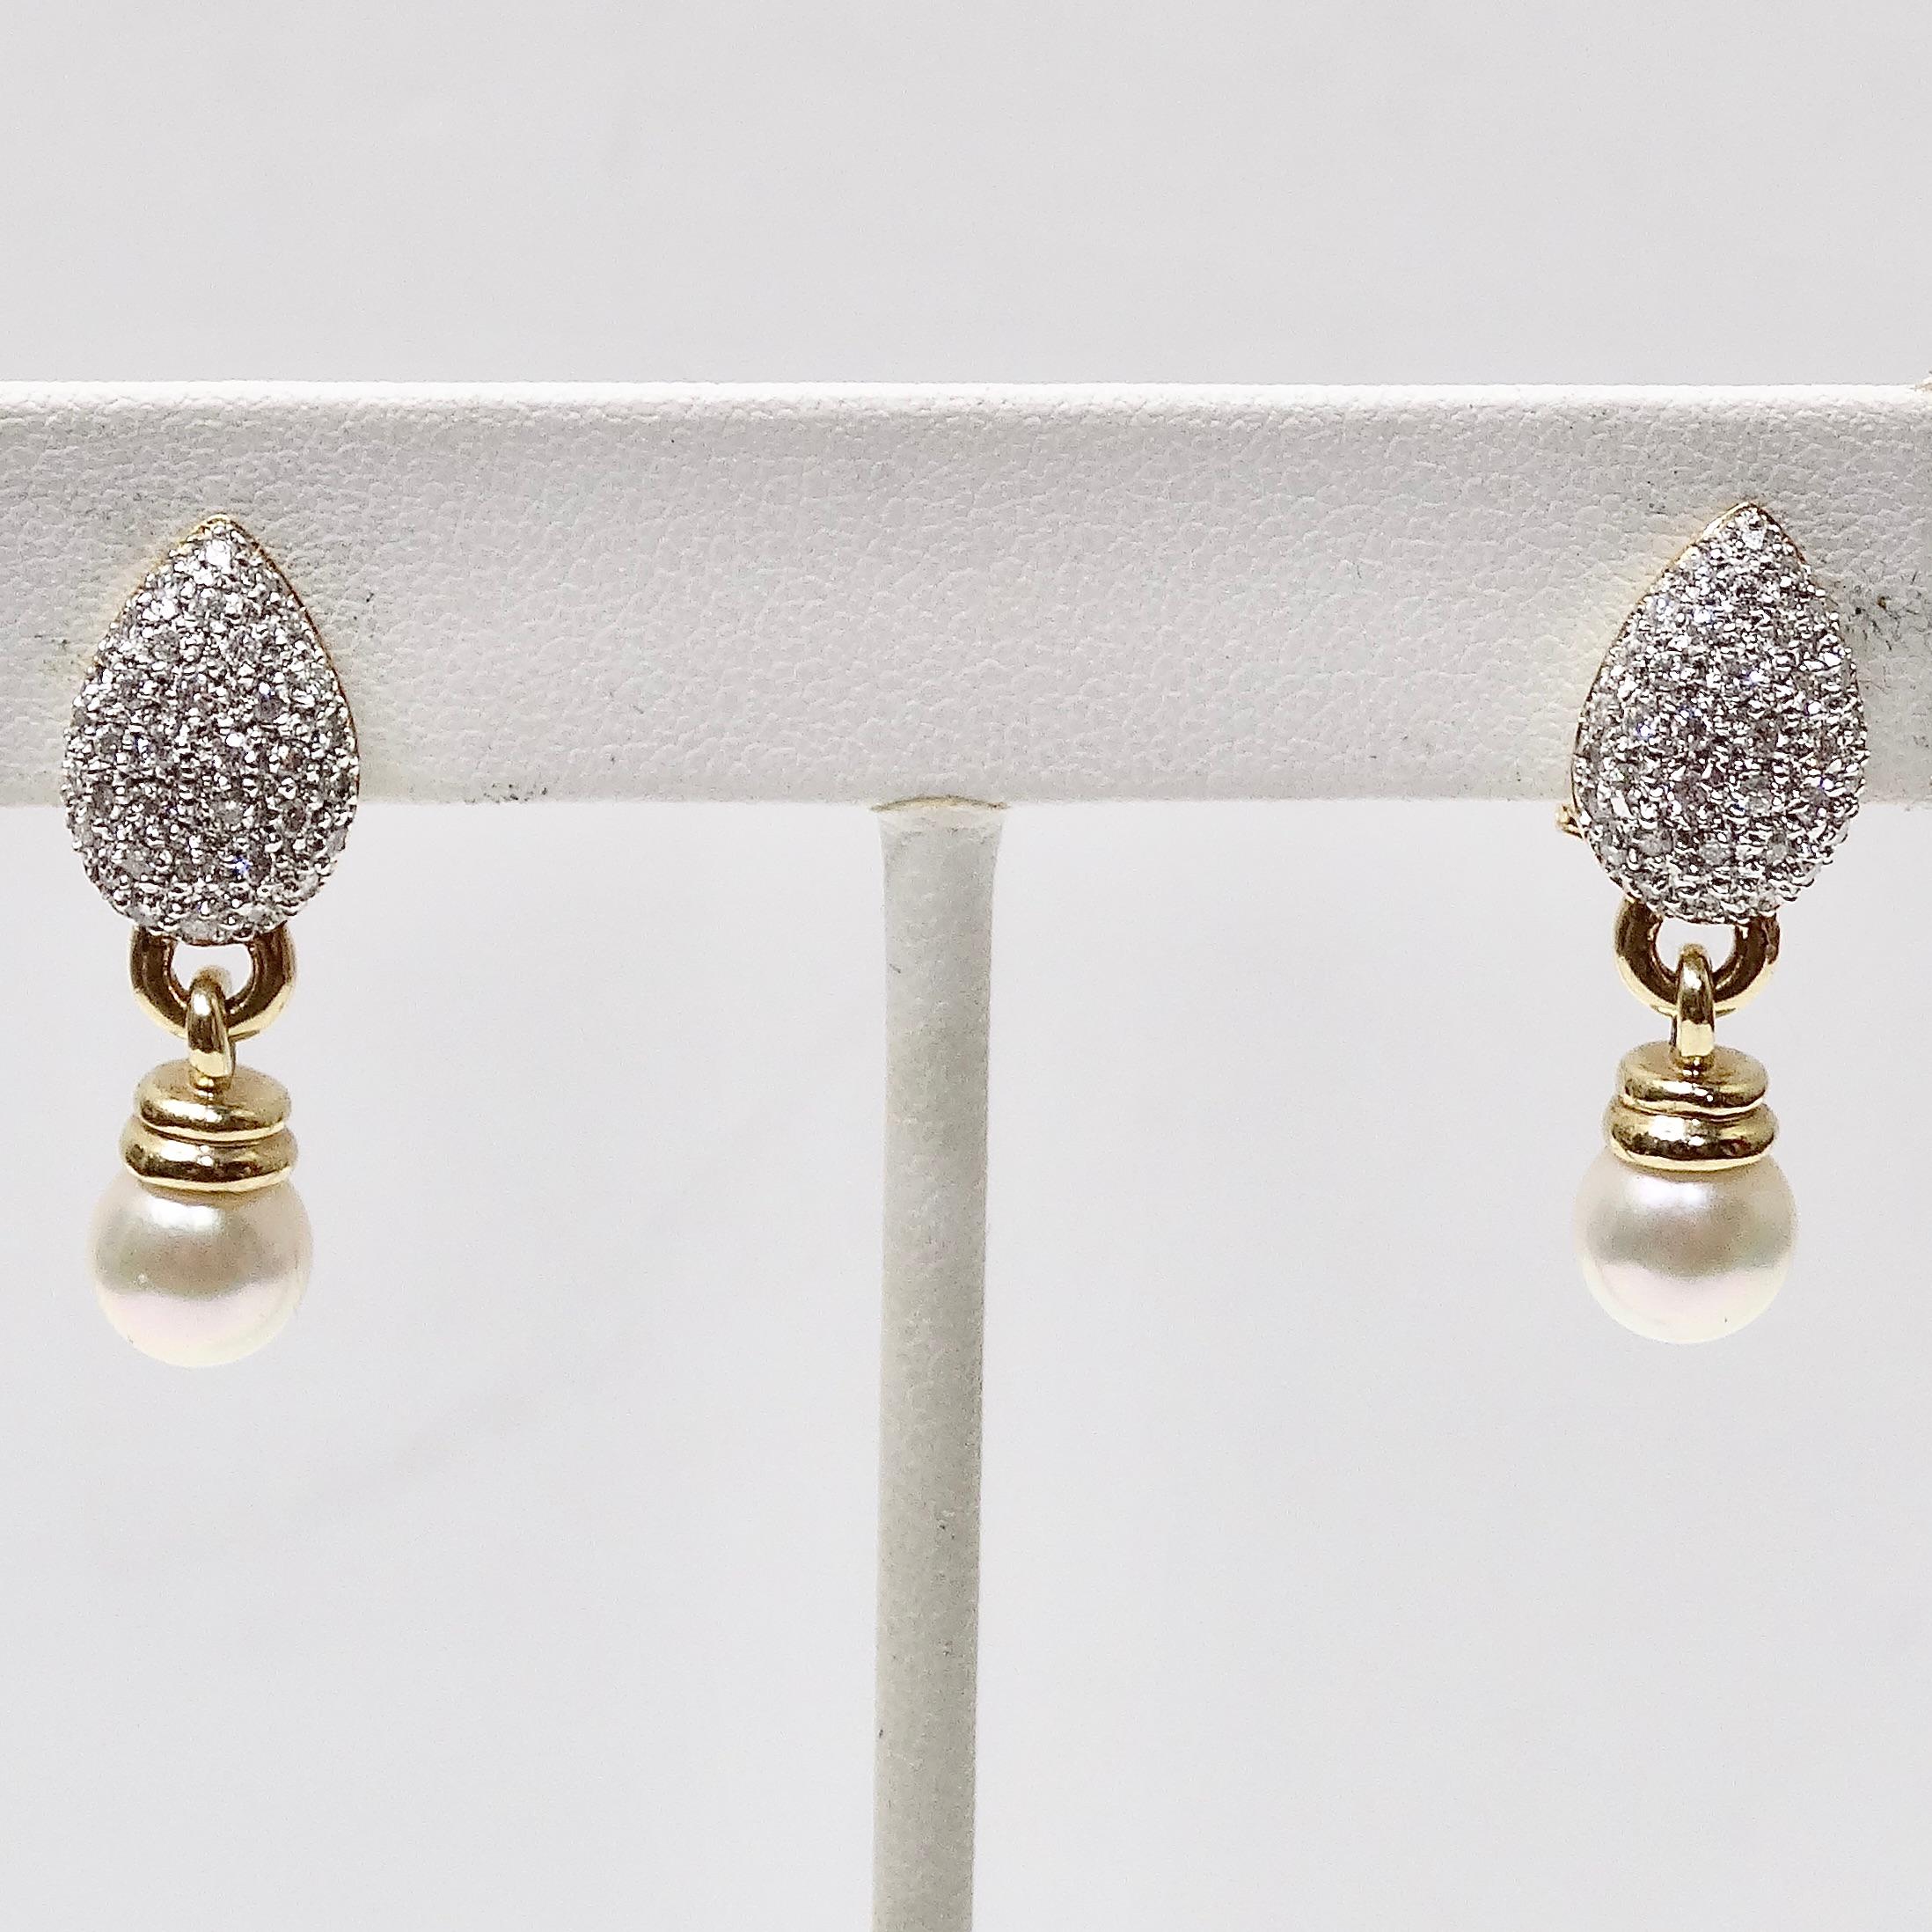 These vintage diamond and pearl earrings are so classic and breath taking! Gorgeous 14K gold drop style earrings circa 1980s feature an arrangement of small clustered diamonds accompanied by a beautiful freshwater pearl dangling as the finishing